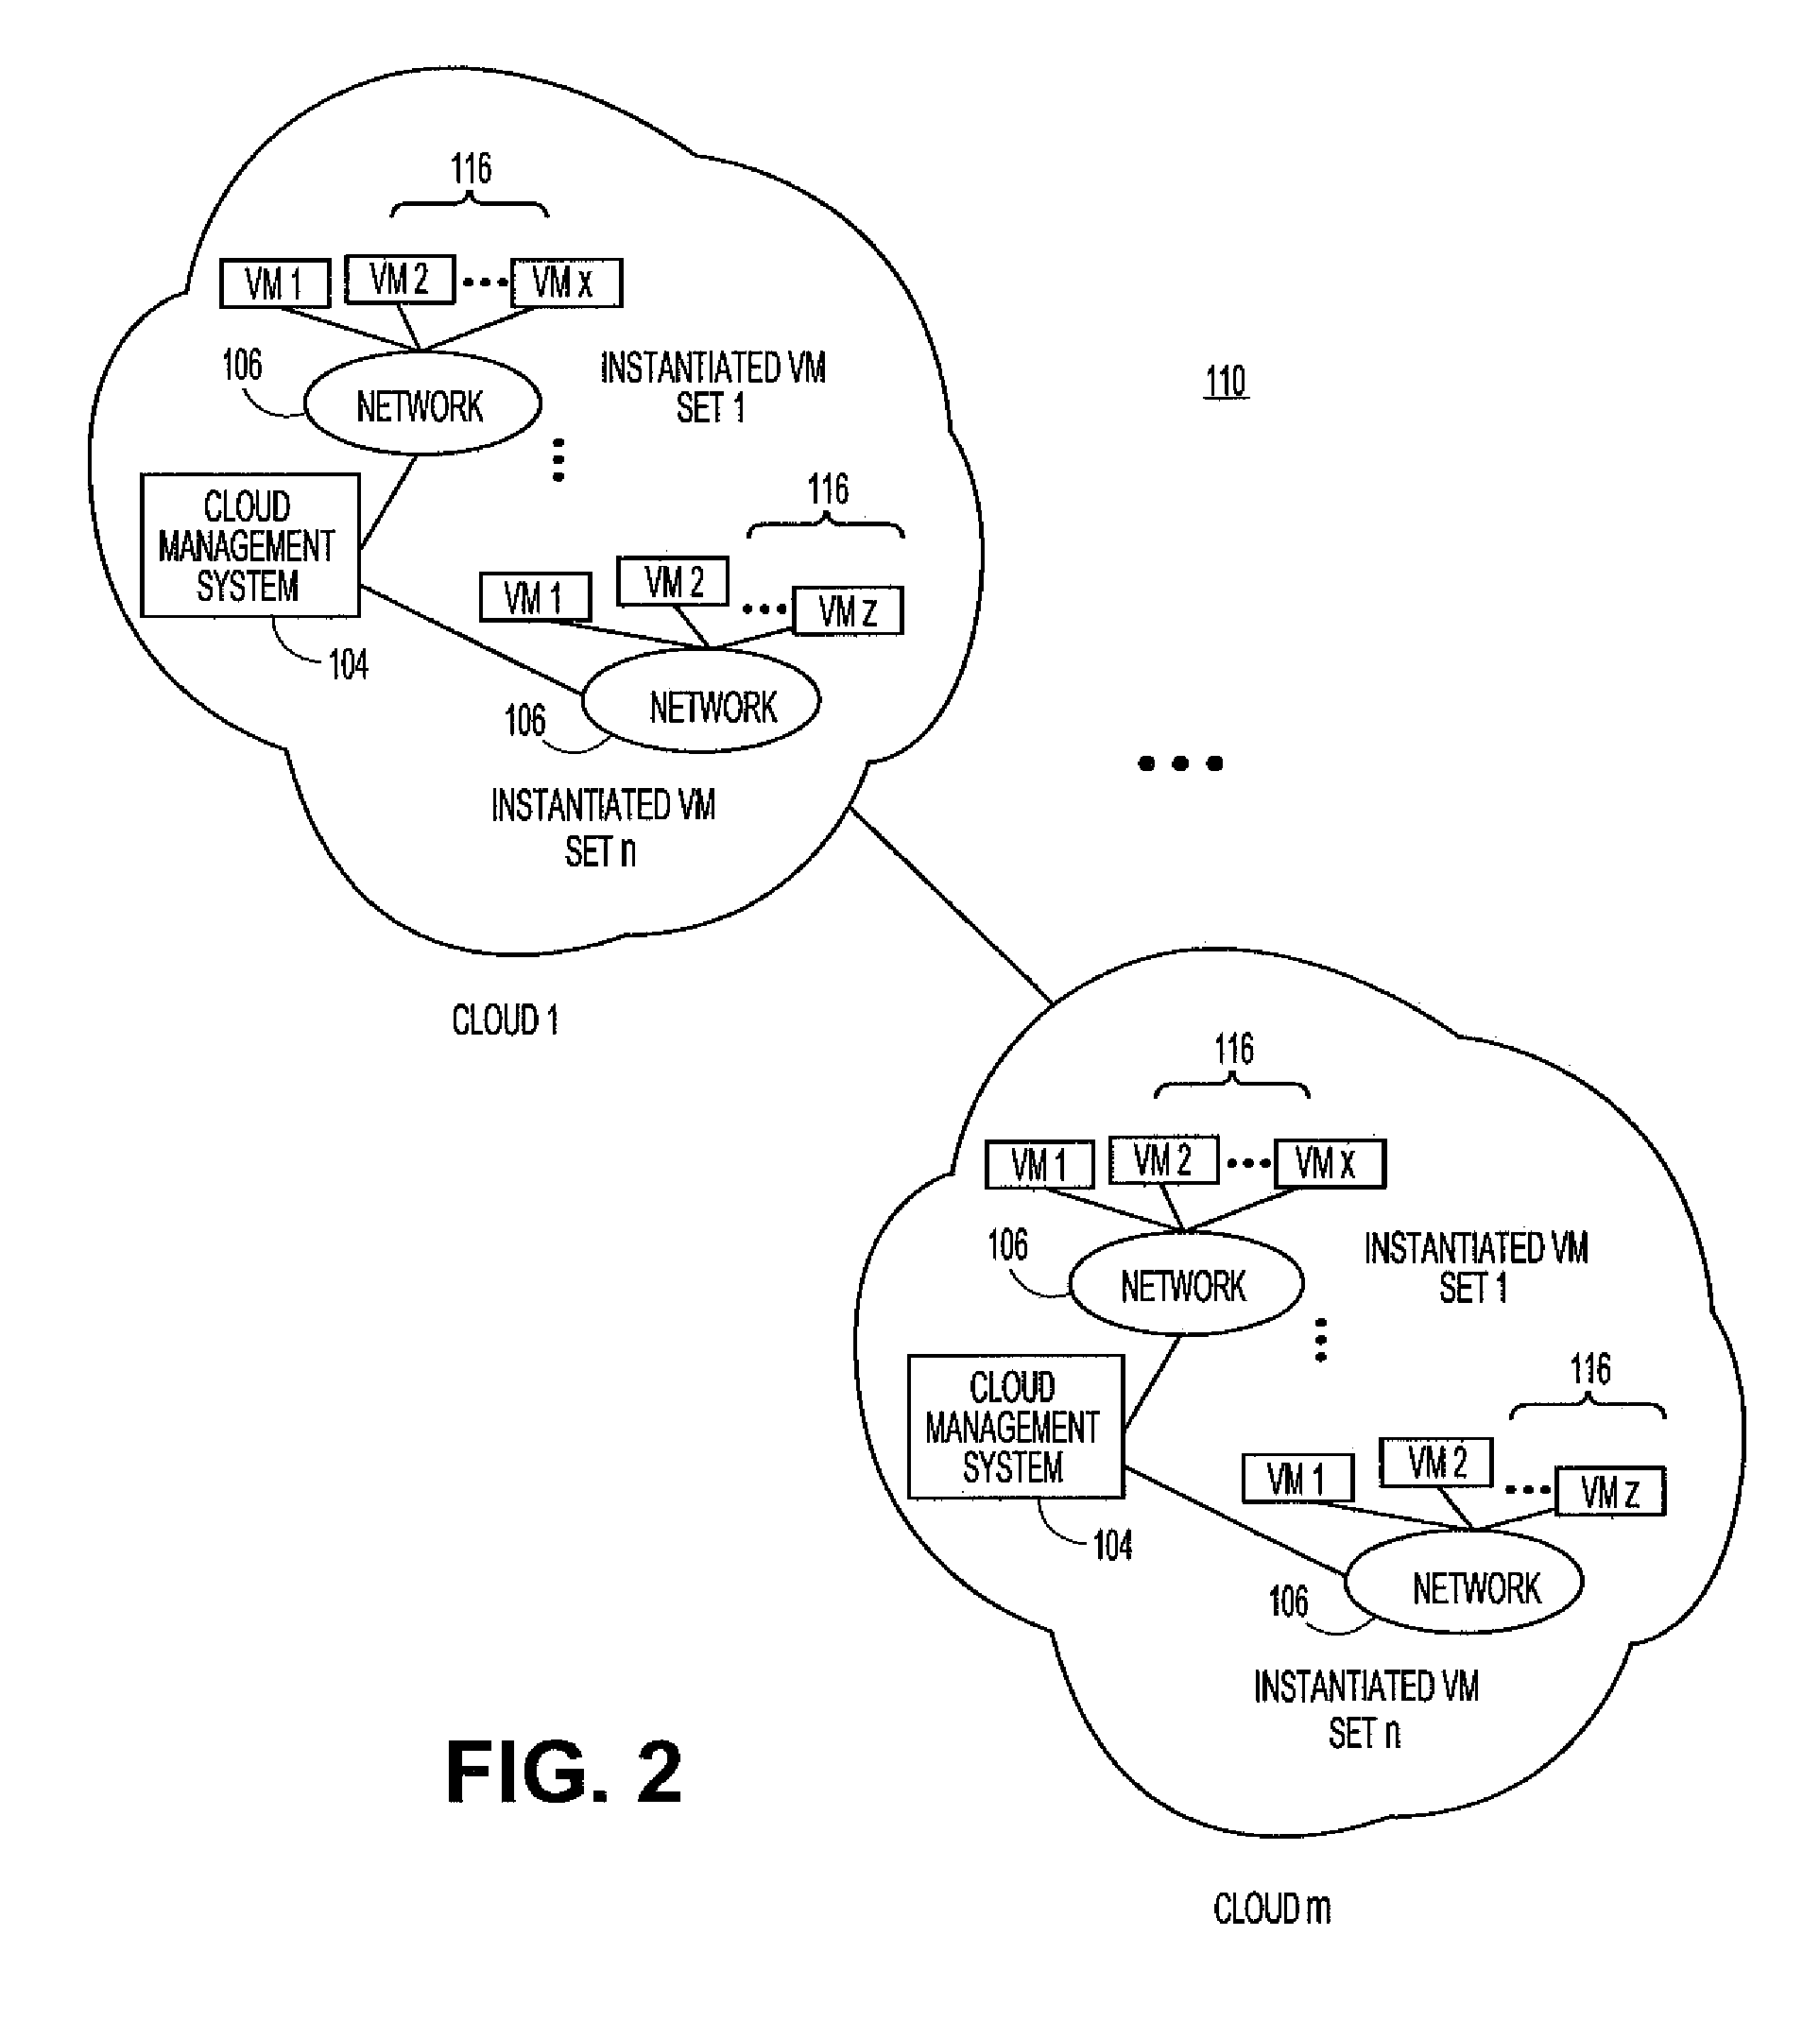 Systems and methods for service aggregation using graduated service levels in a cloud network